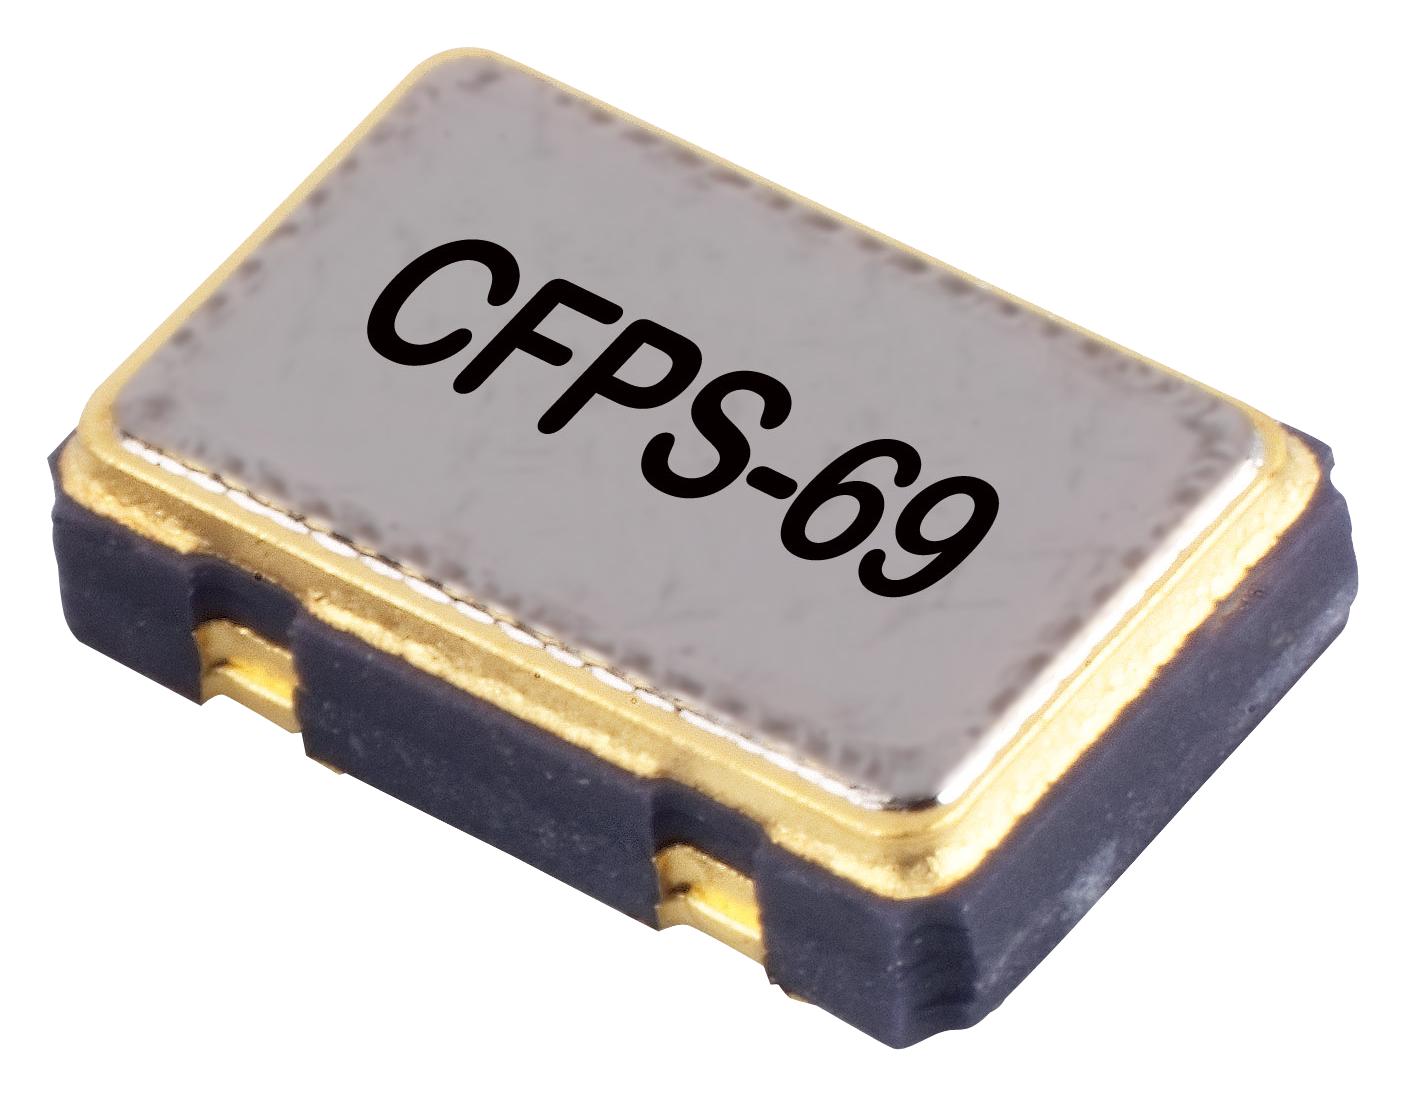 LFSPXO009582 CRYSTAL OSCILLATOR, SMD, 4MHZ IQD FREQUENCY PRODUCTS